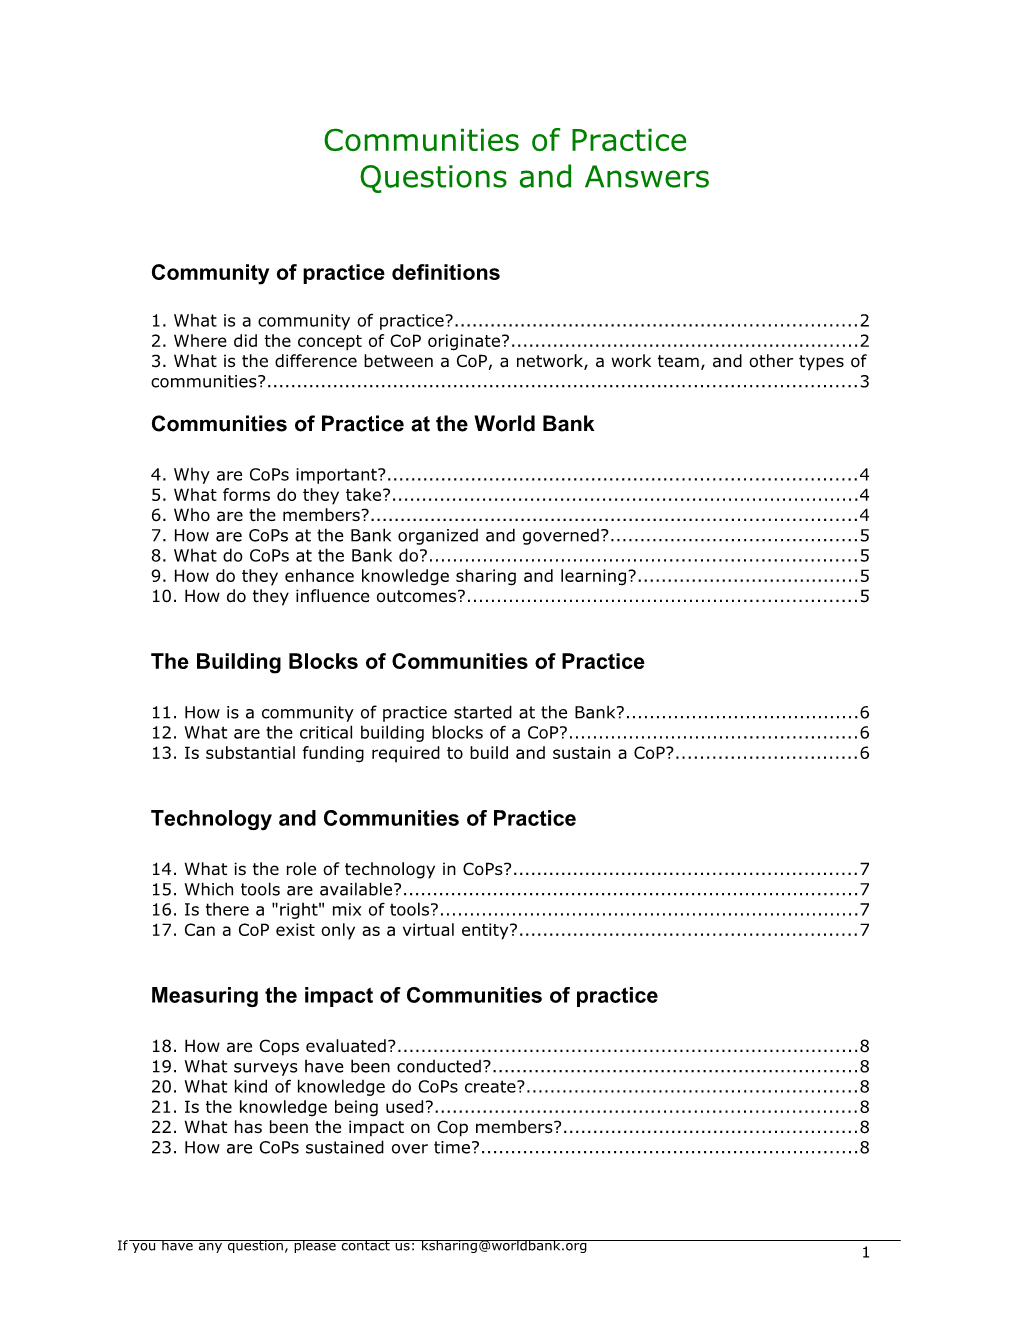 Communities of Practice Questions and Answers